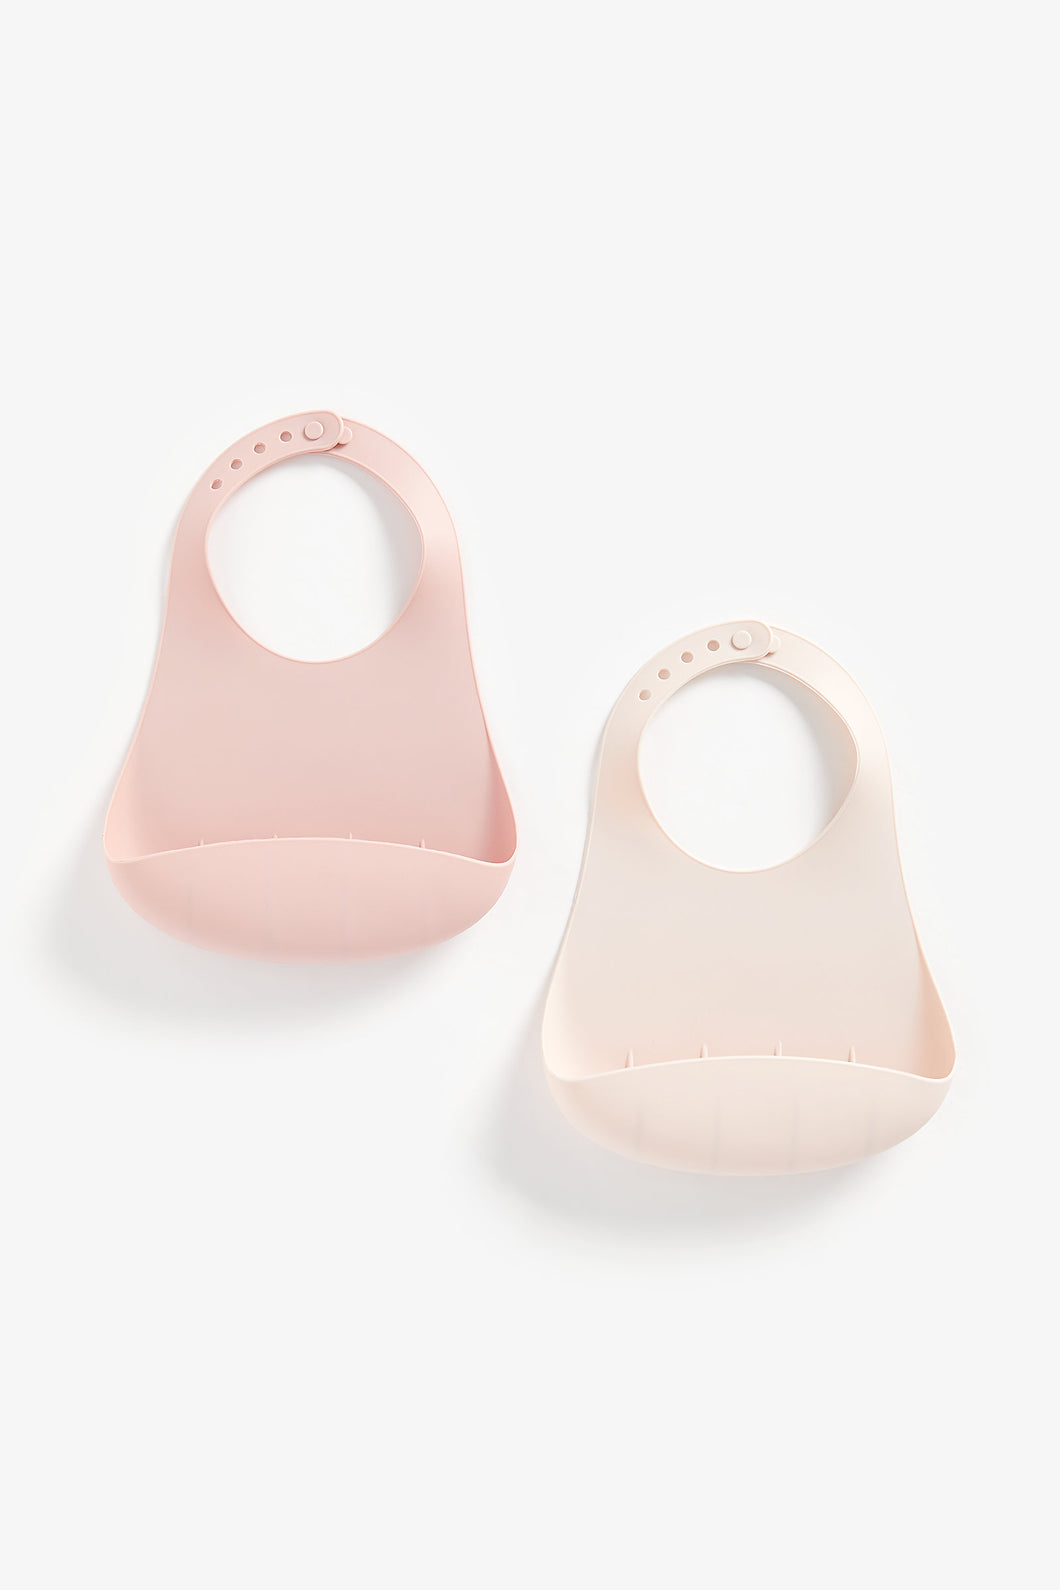 Mothercare Flutterby Crumb-Catcher Silicone Bibs - 2 Pack